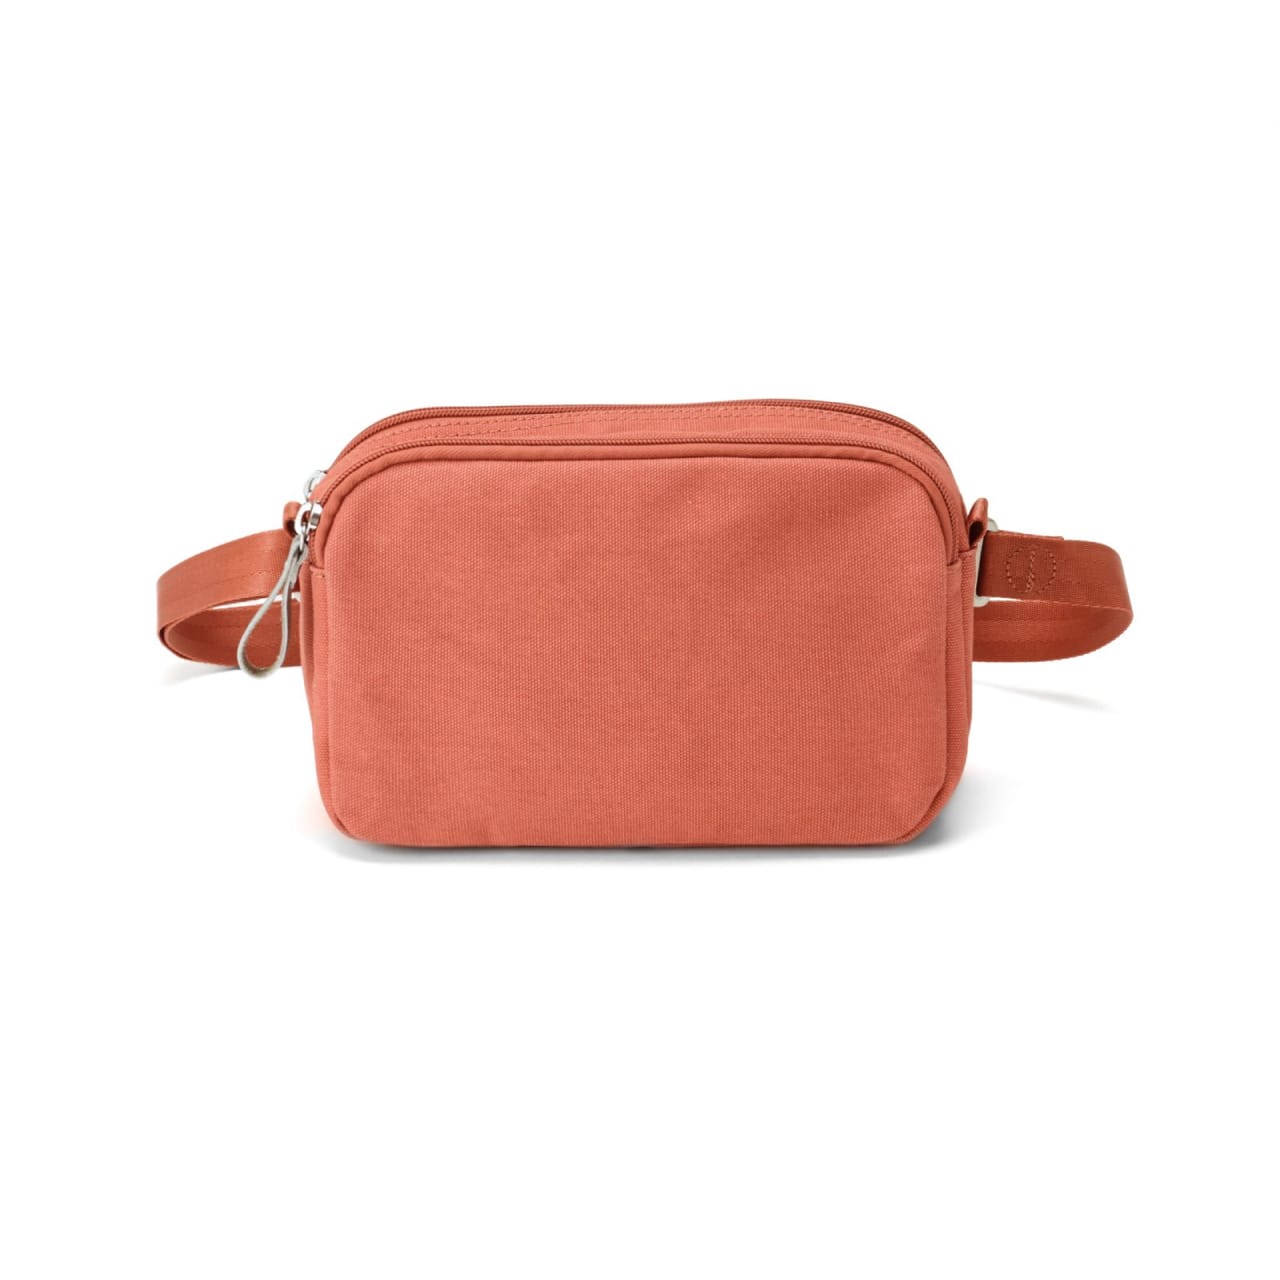 Salmon orange fabric pouch with match zipper, ash zipper pull, and adjustable hip belt.